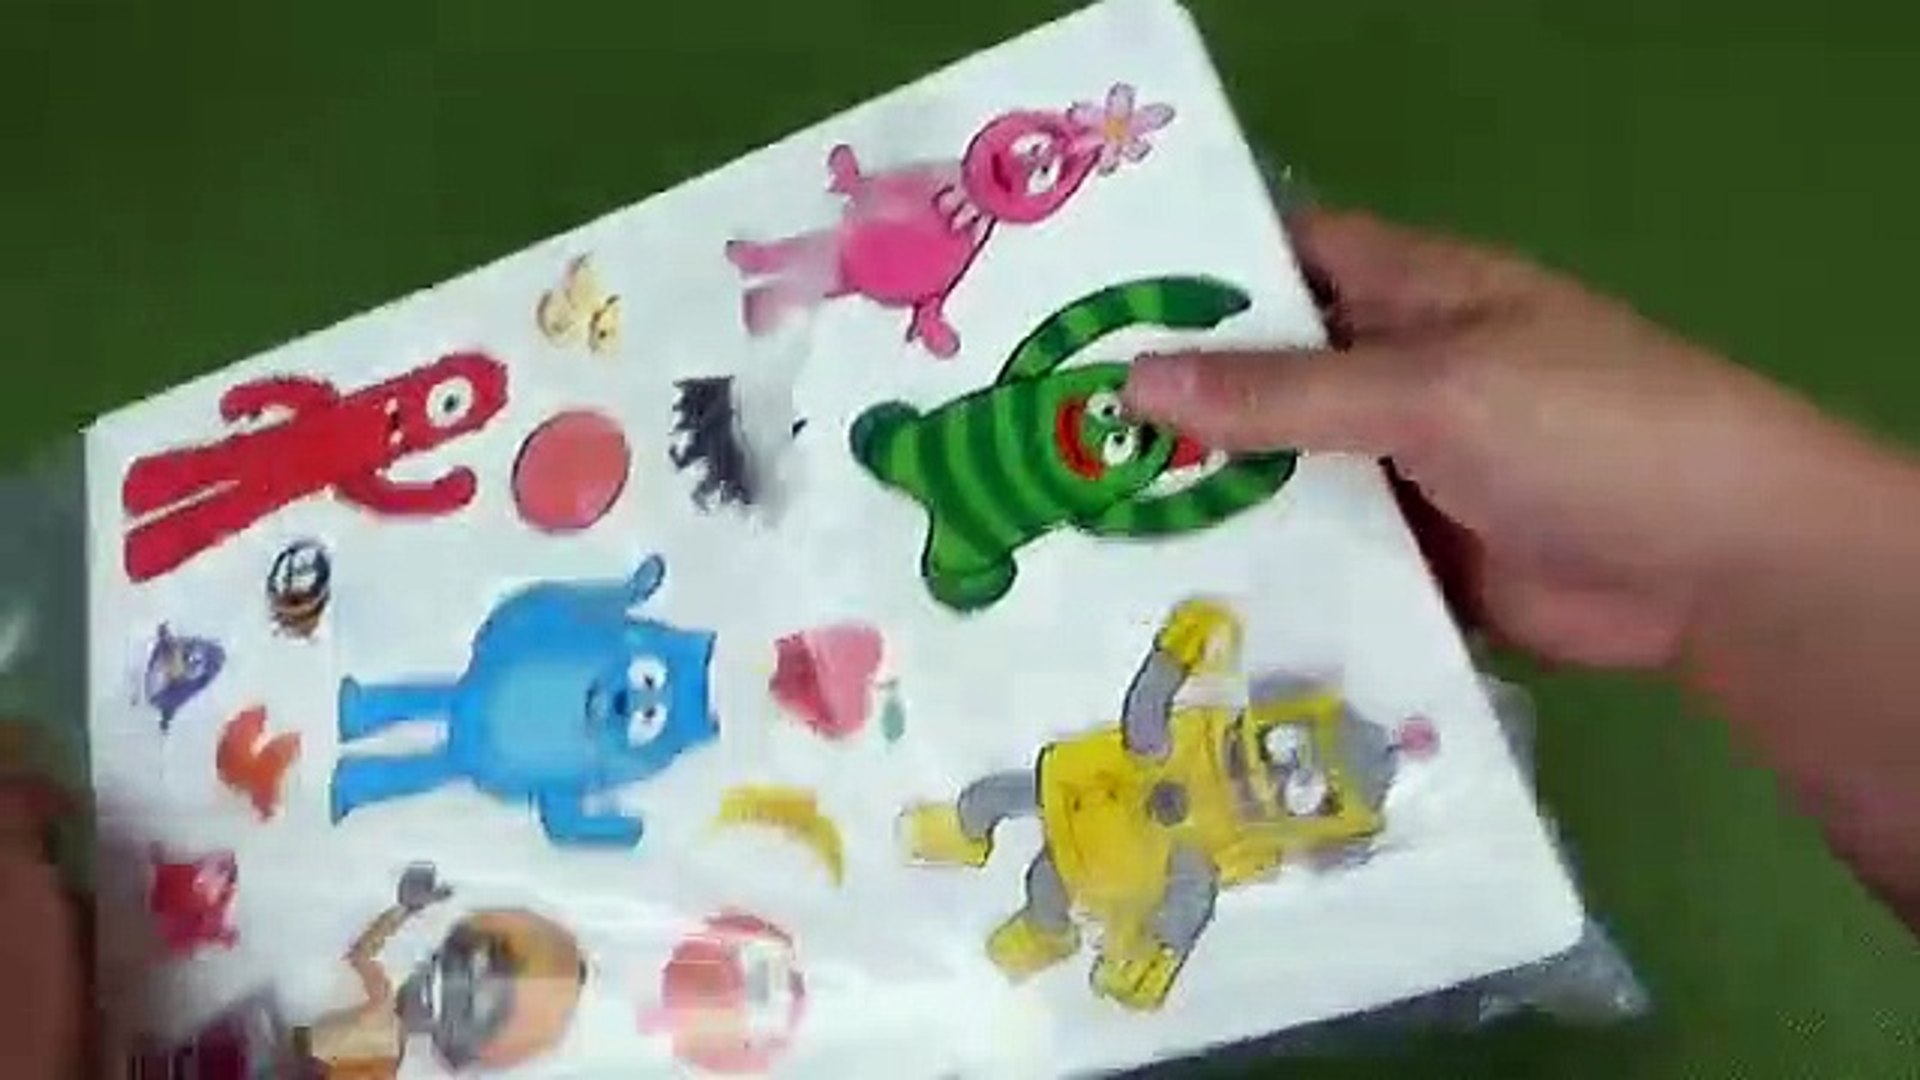 Yo Gabba Gabba Gang Toy Set Review and Unboxing - video Dailymotion